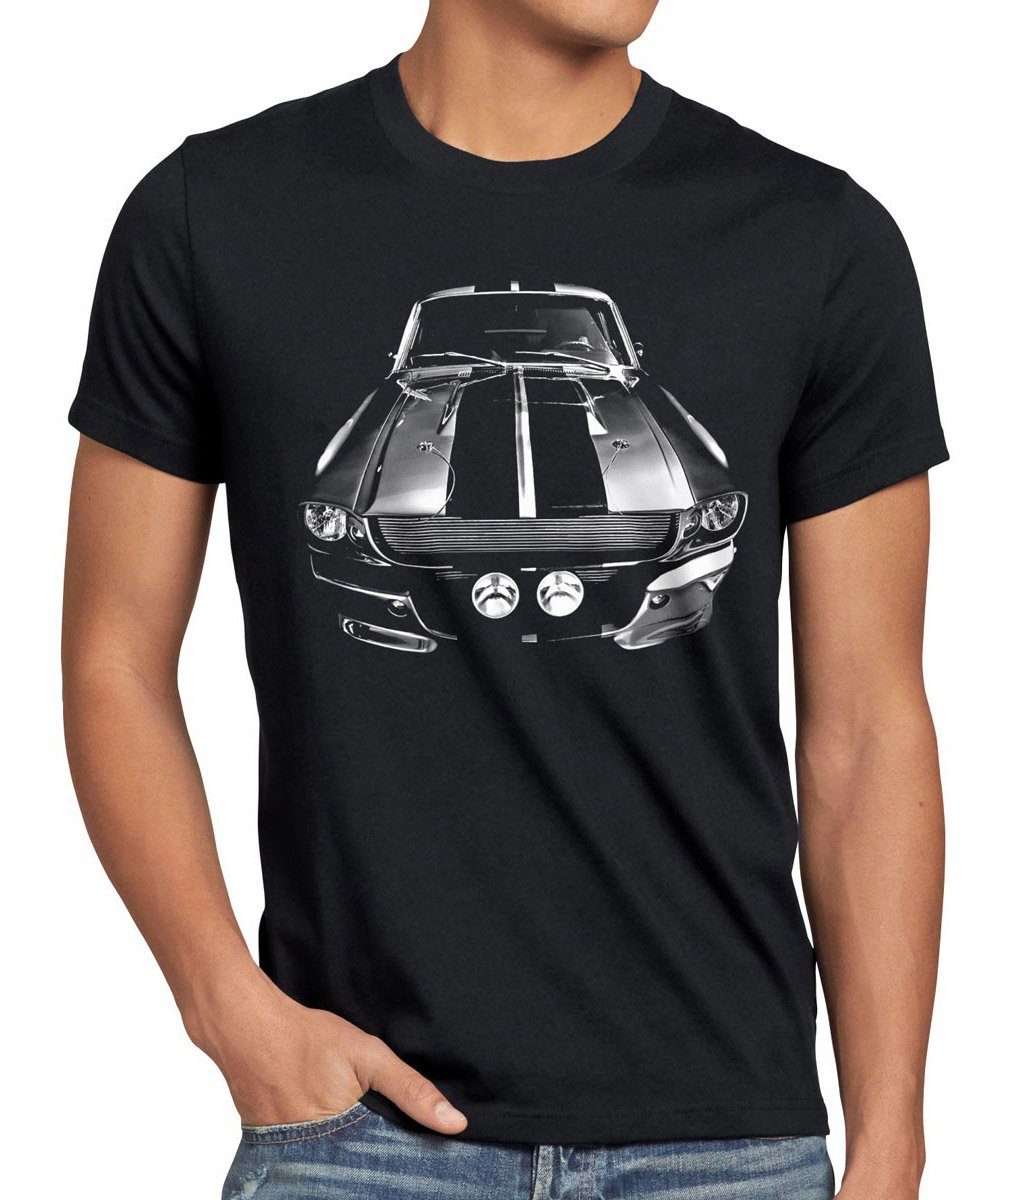 style3 Print-Shirt Herren T-Shirt Mustang muscle car eleanor ford usa us gt500 shelby pony v8 rock